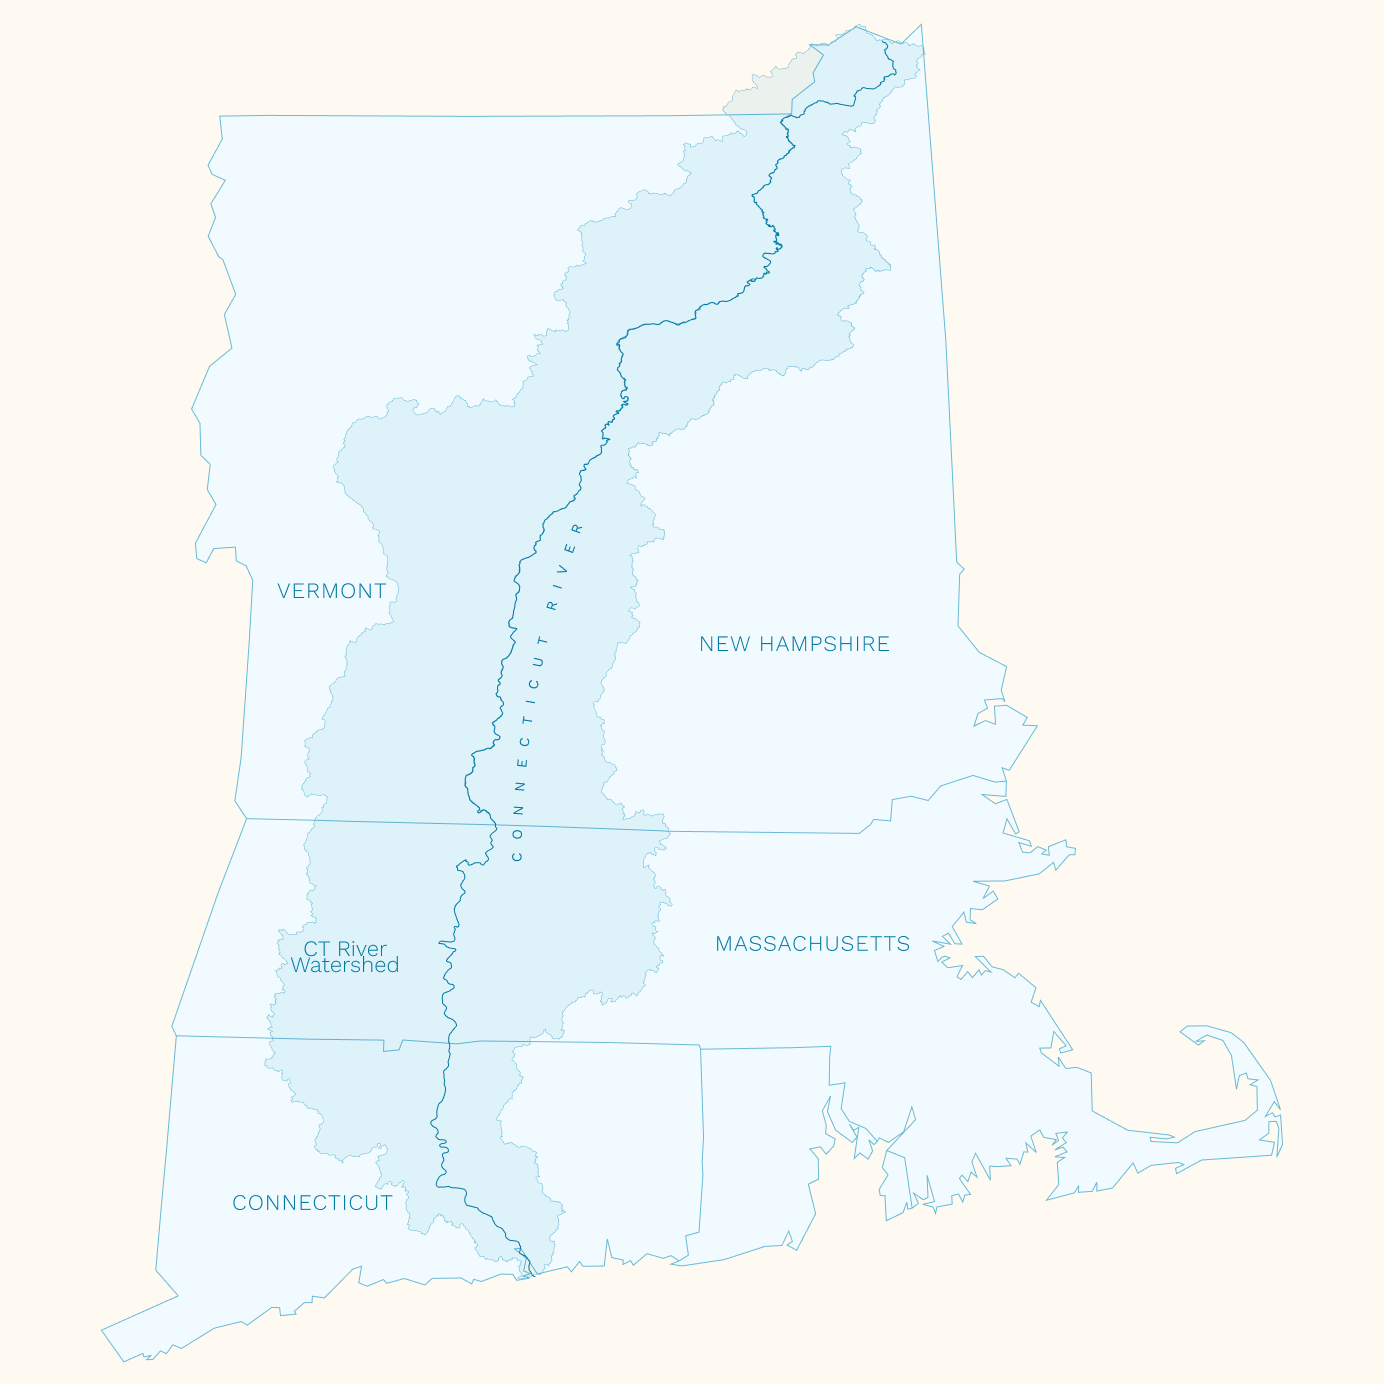 Basemap showing New England states and the Connecticut river watershed